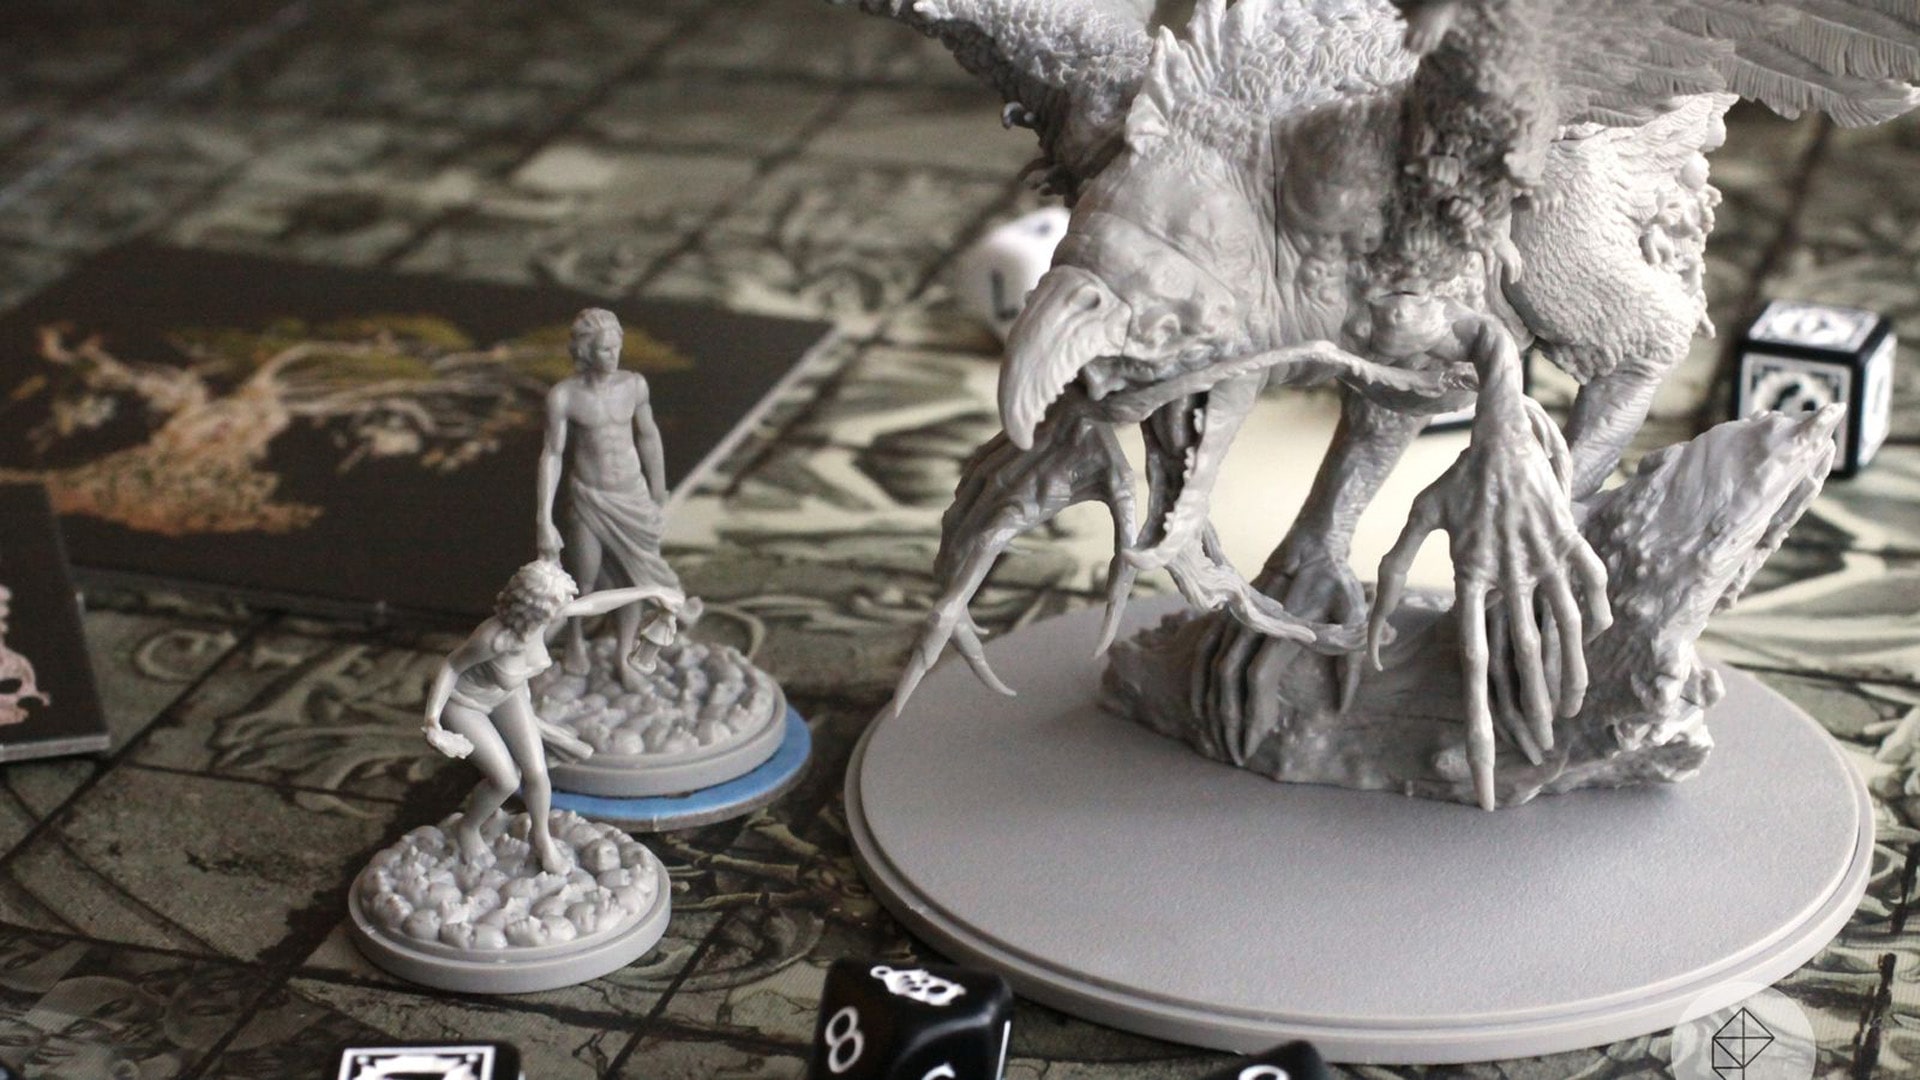 Intricately detailed miniatures and game setup of Kingdom Death: Monster, reflecting the game's complex strategy and dark fantasy theme.